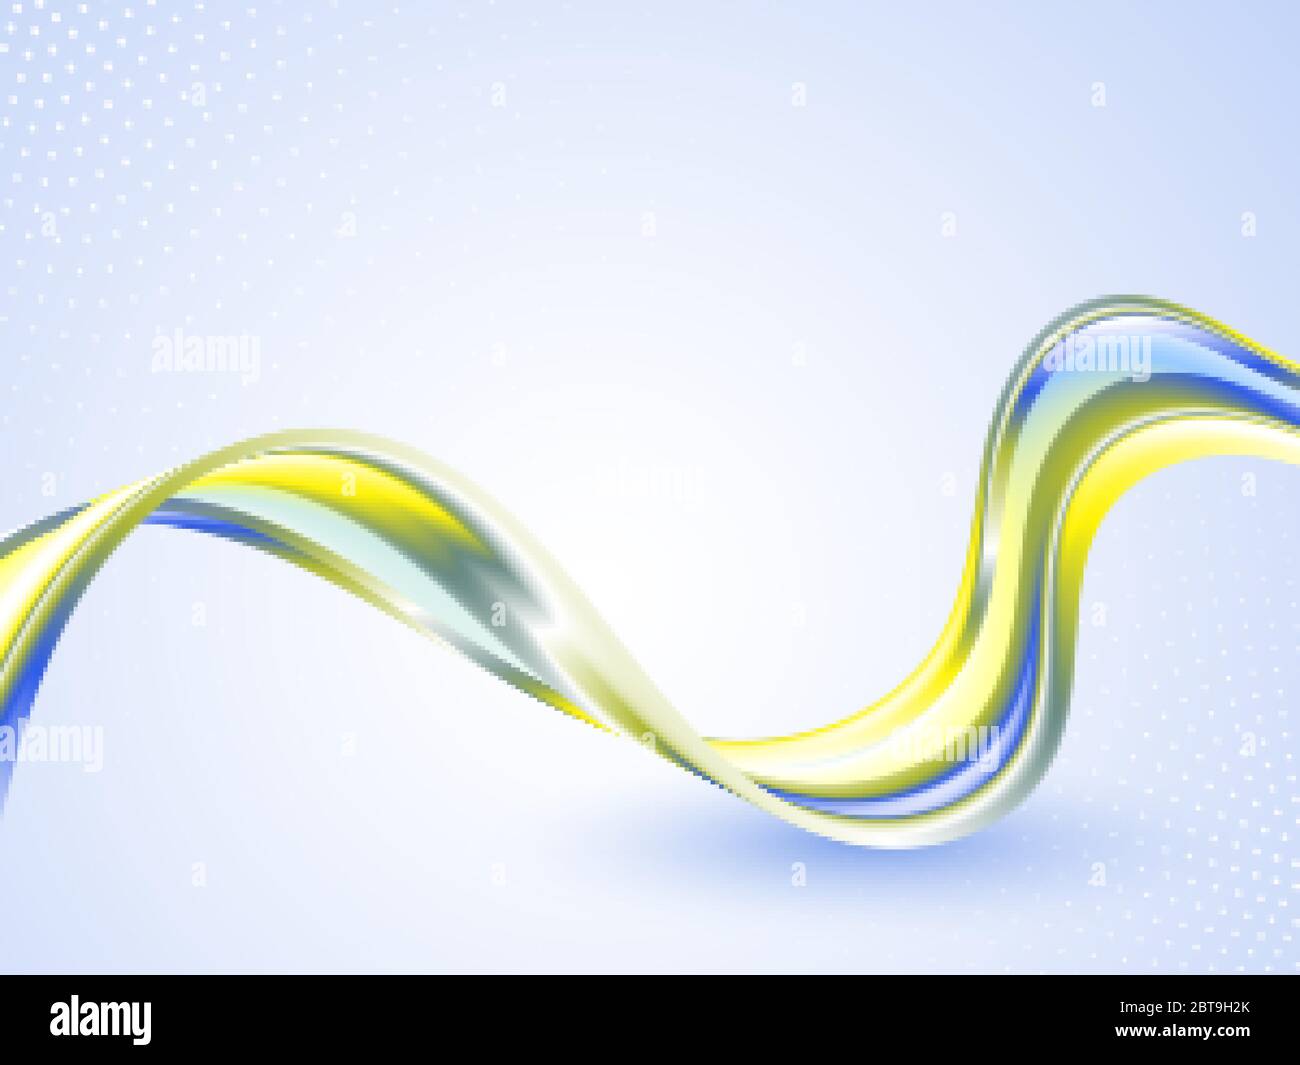 Abstract colorful background with wave, illustration, vector Stock Vector